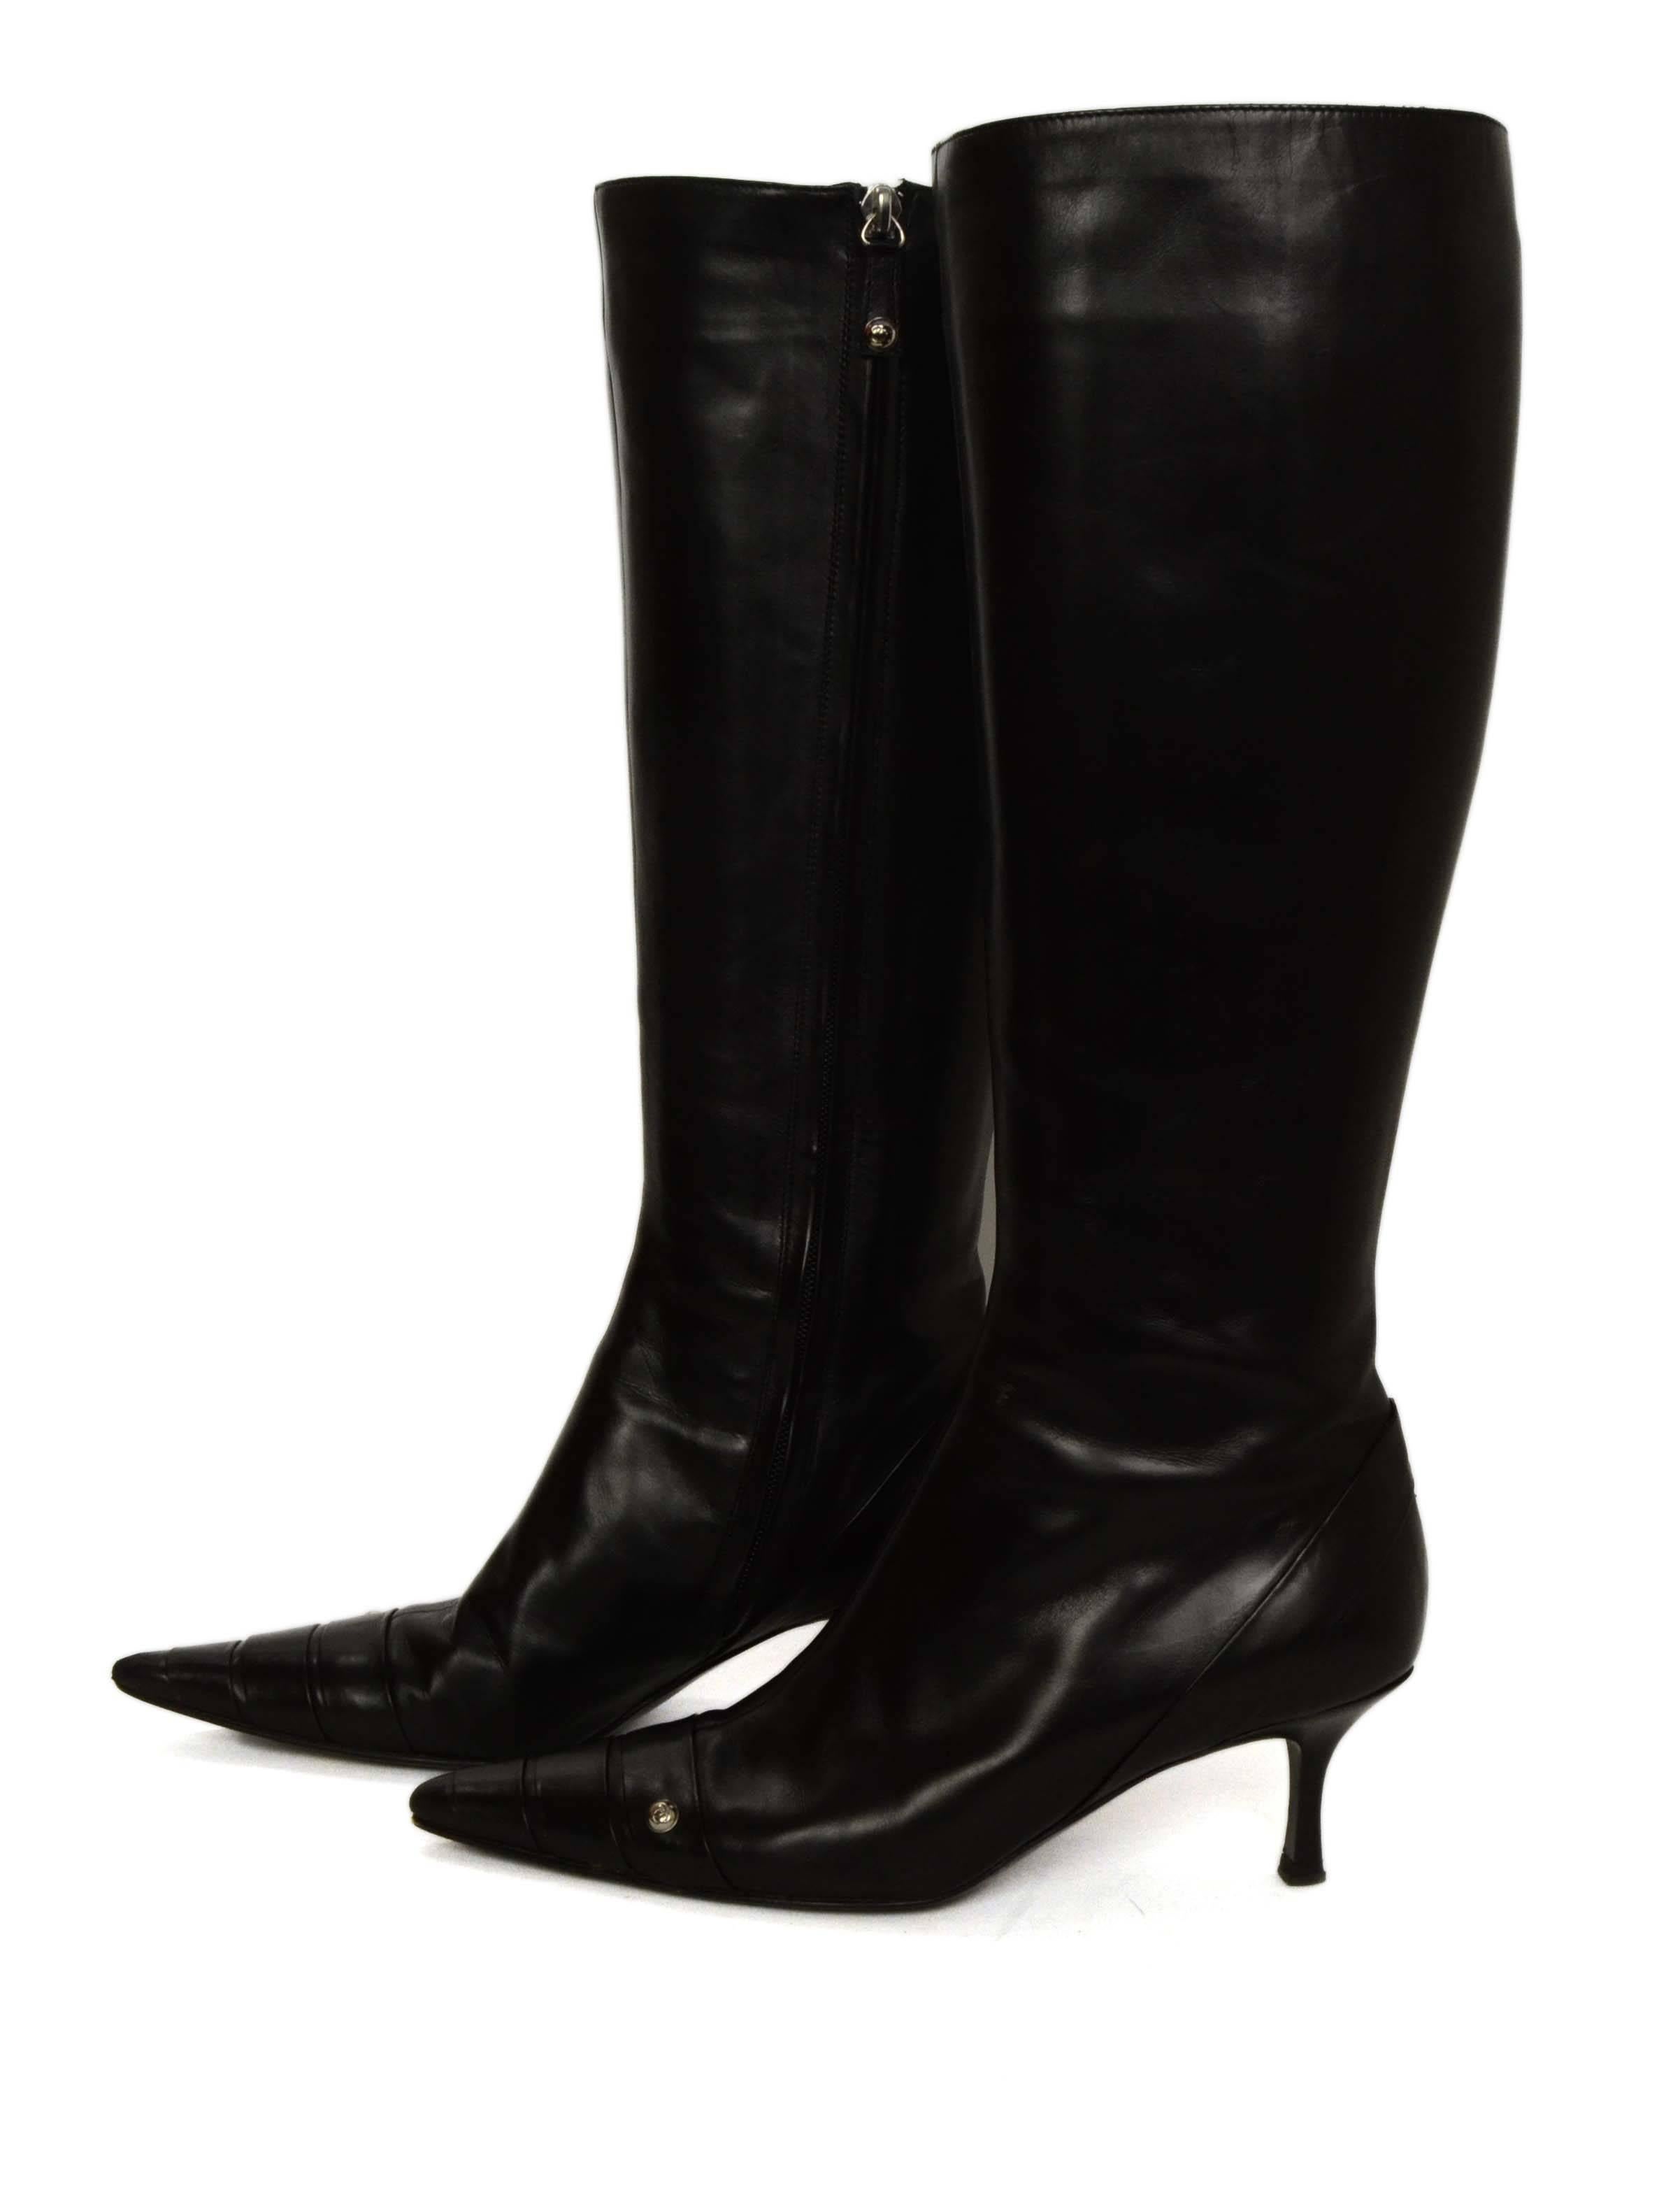 Chanel Black Leather Kitten Heel Knee-High Boots 
Made In: Italy
Color: Black
Materials: Leather
Closure: Side zipper
Sole Stamp: CC Made in Italy 38
Overall Condition: Excellent pre-owned condition with the exception of wearing throughout